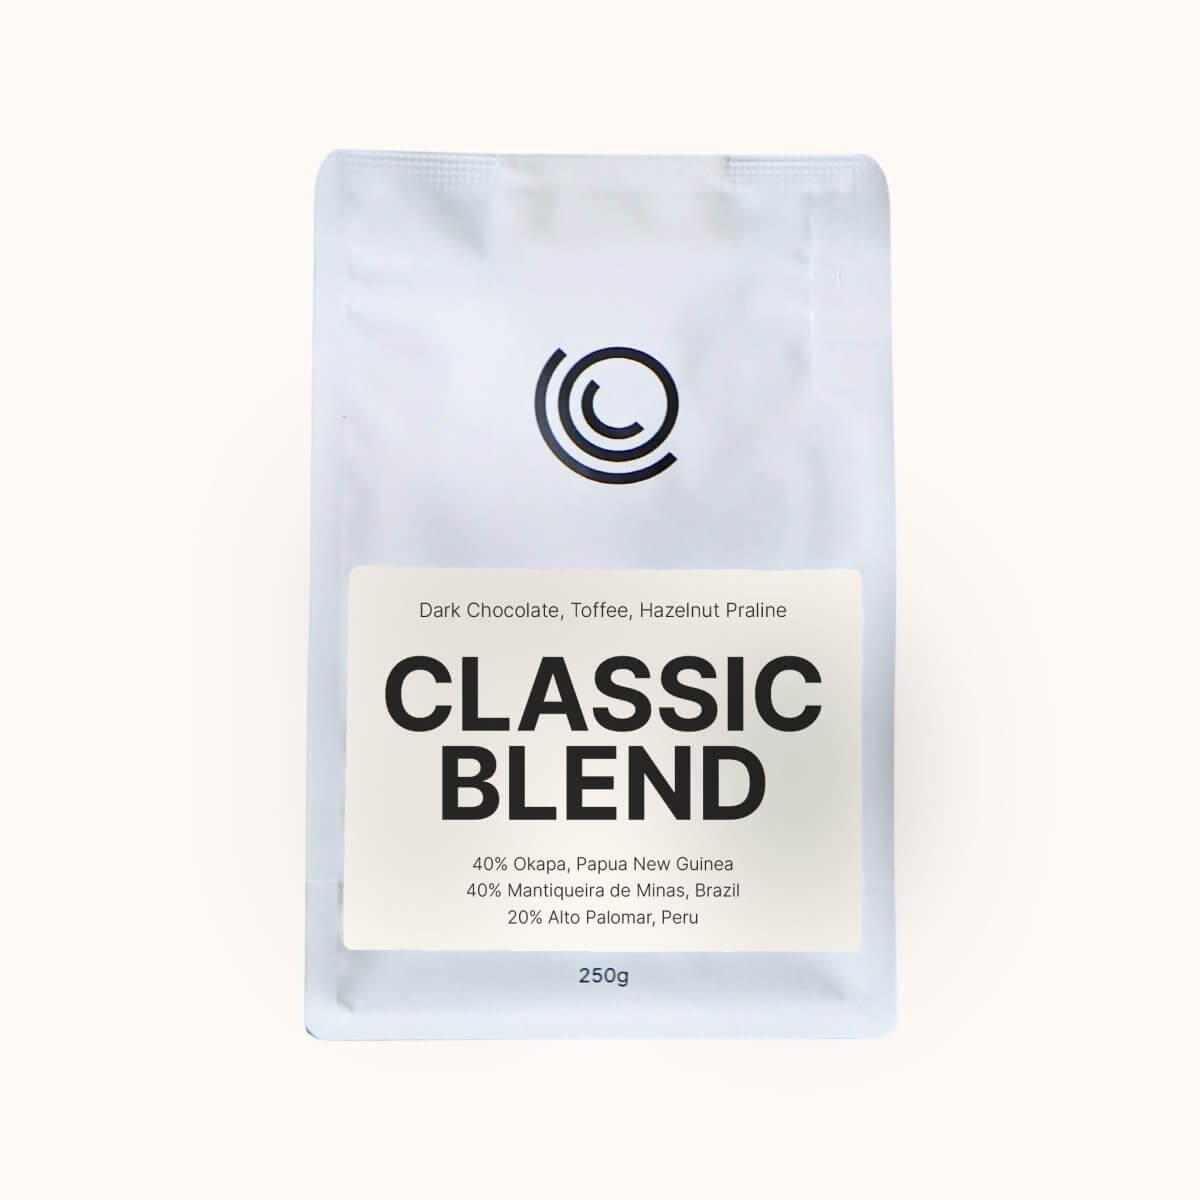 Coffee on Cue 250g bag of Classic Blend